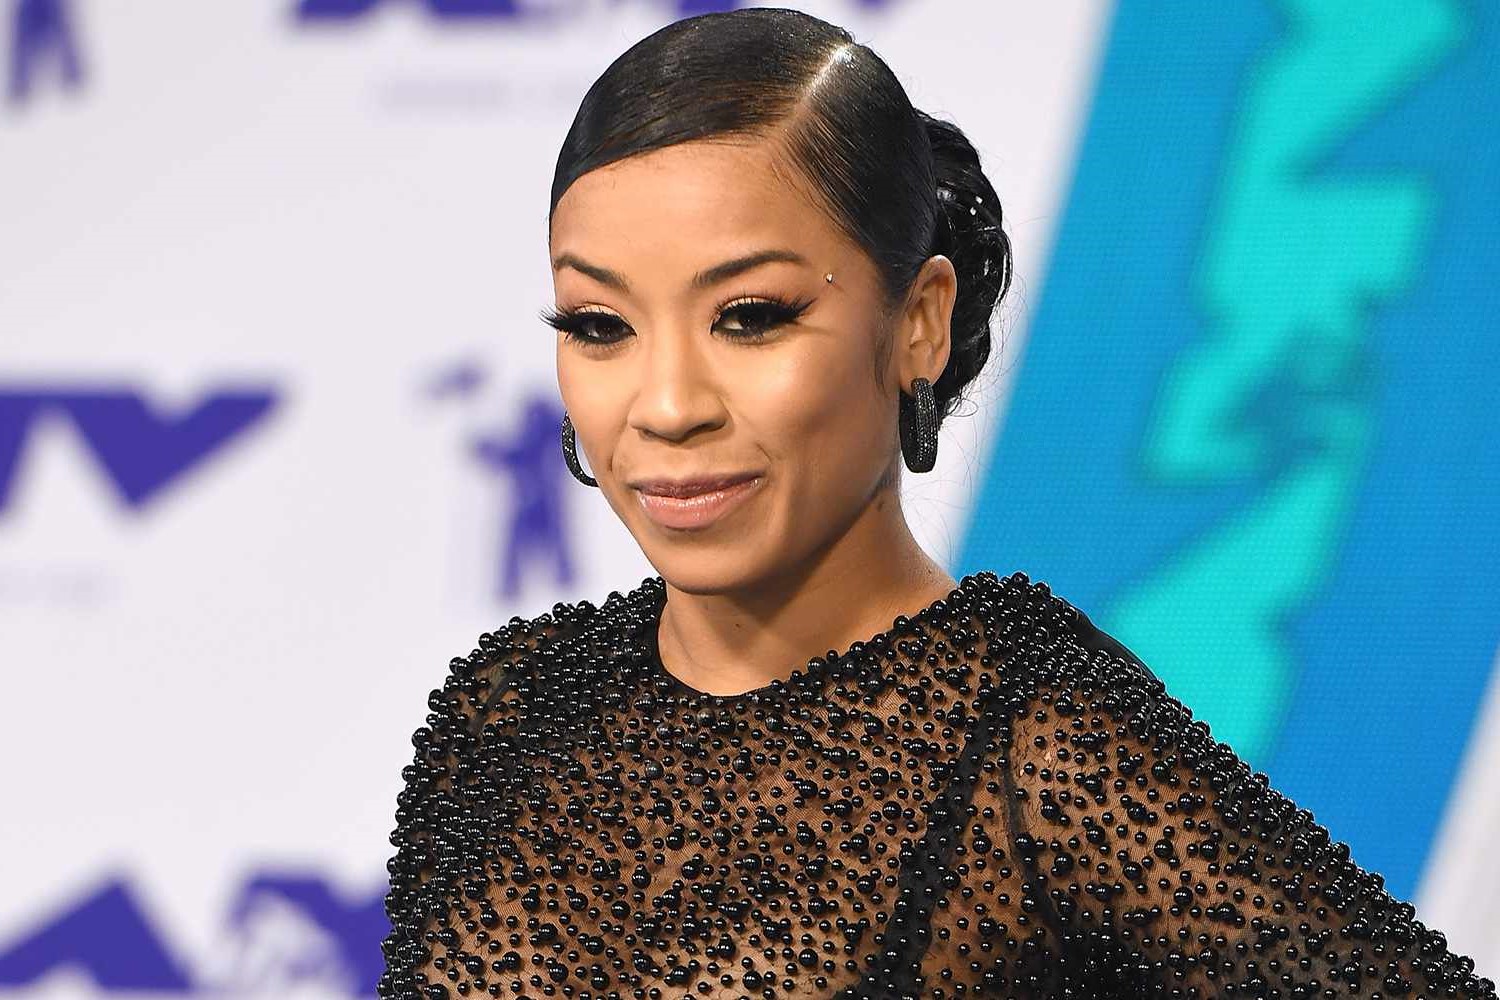 Keyshia Cole Surprises Atlanta Middle Schoolers With Performance Of Hit Song ‘Love’